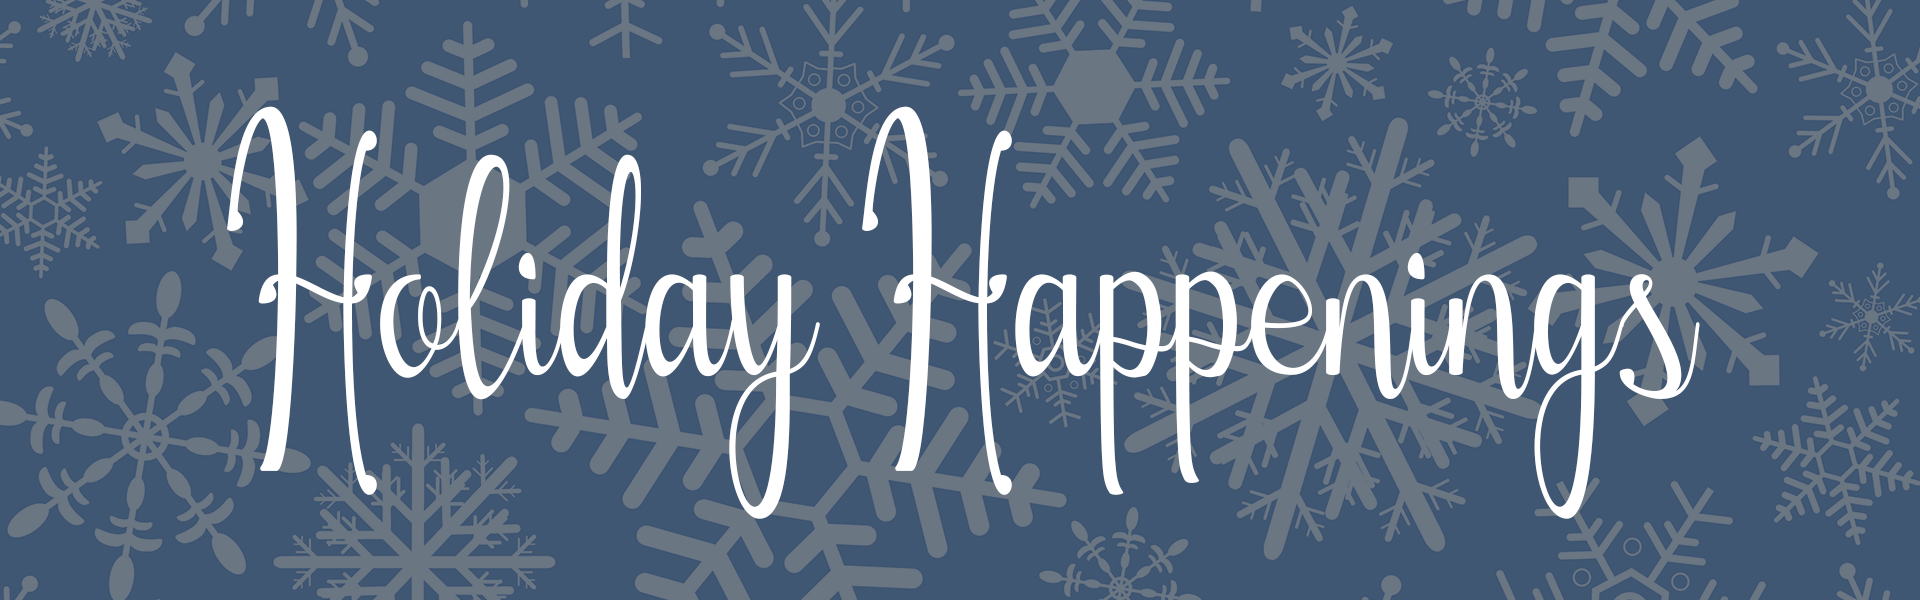 Holiday Happenings on blue snowflake background